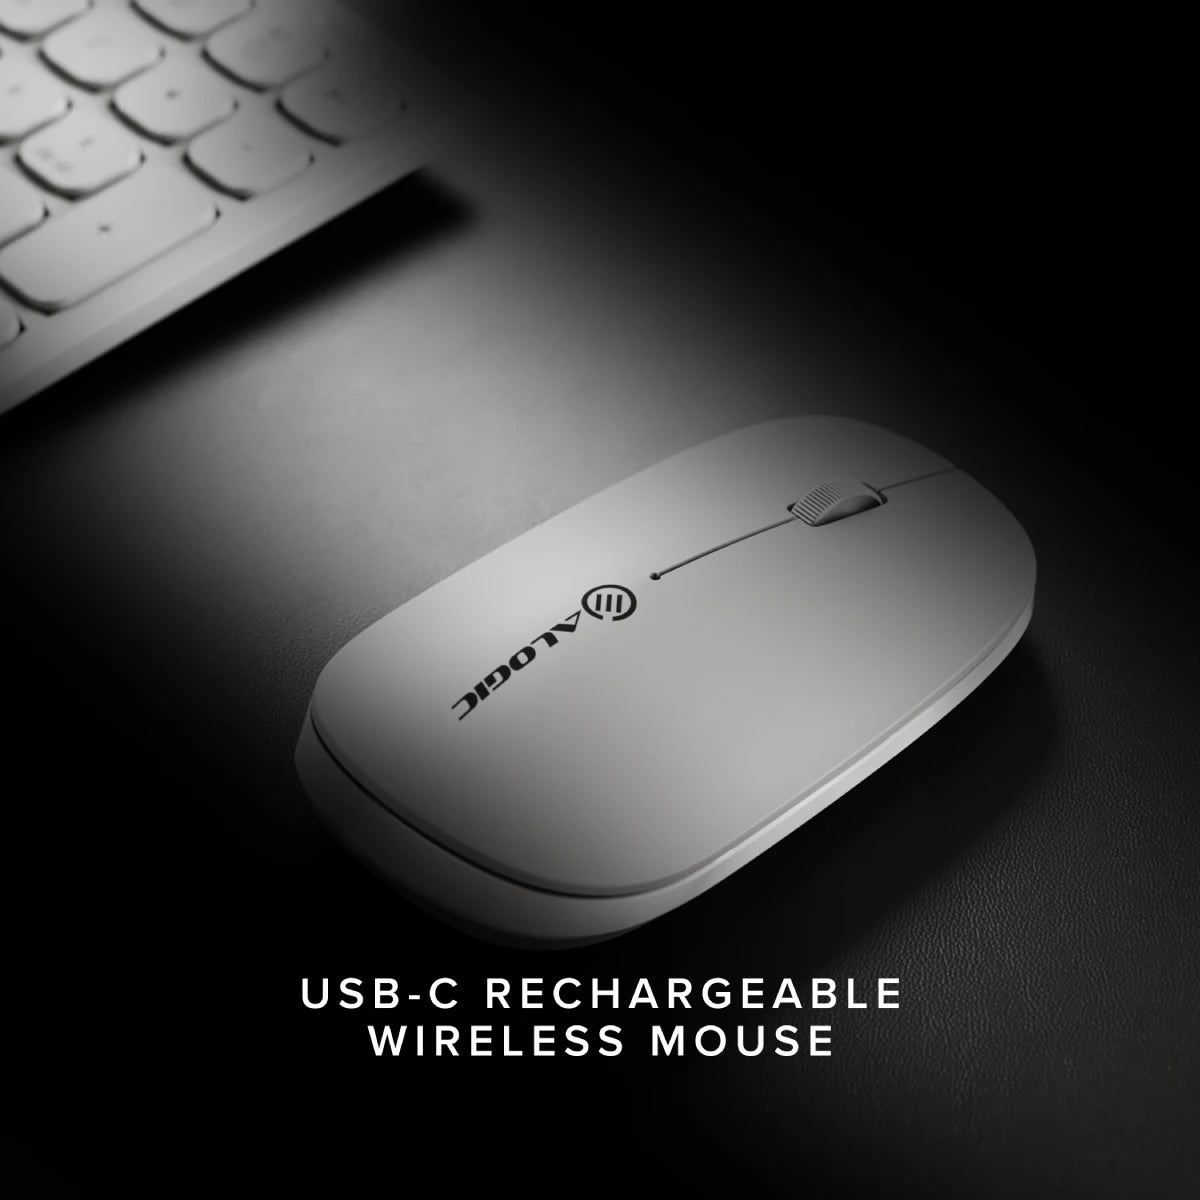 Echelon USB-C Rechargeable Wireless Mouse (White)